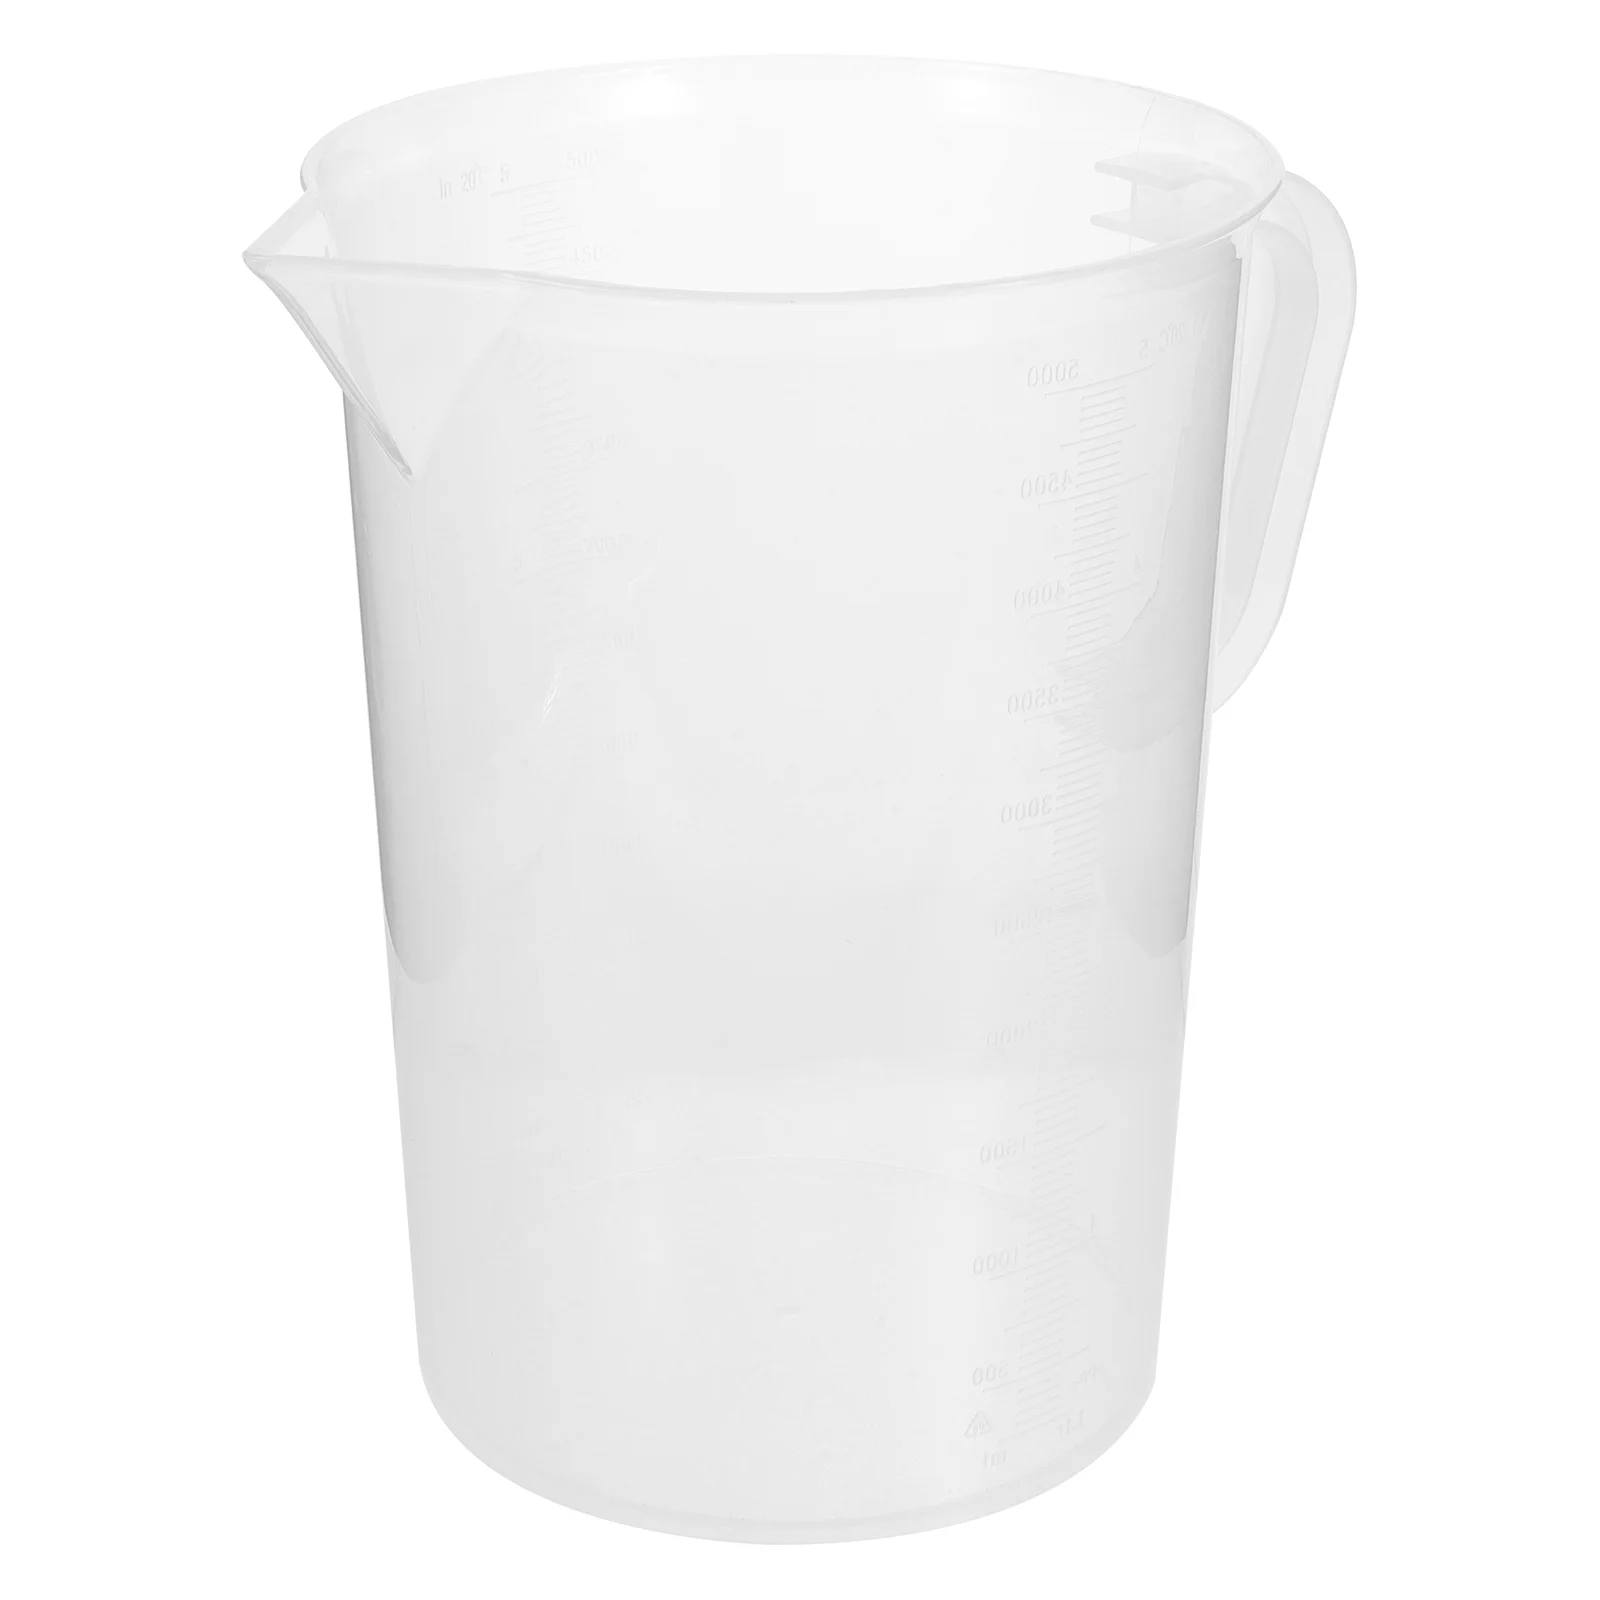 

5000 Ml Measuring Cup Home Graduated Cups Baking Tool Tools Liquid Containers Plastic Practical Pitcher Lid